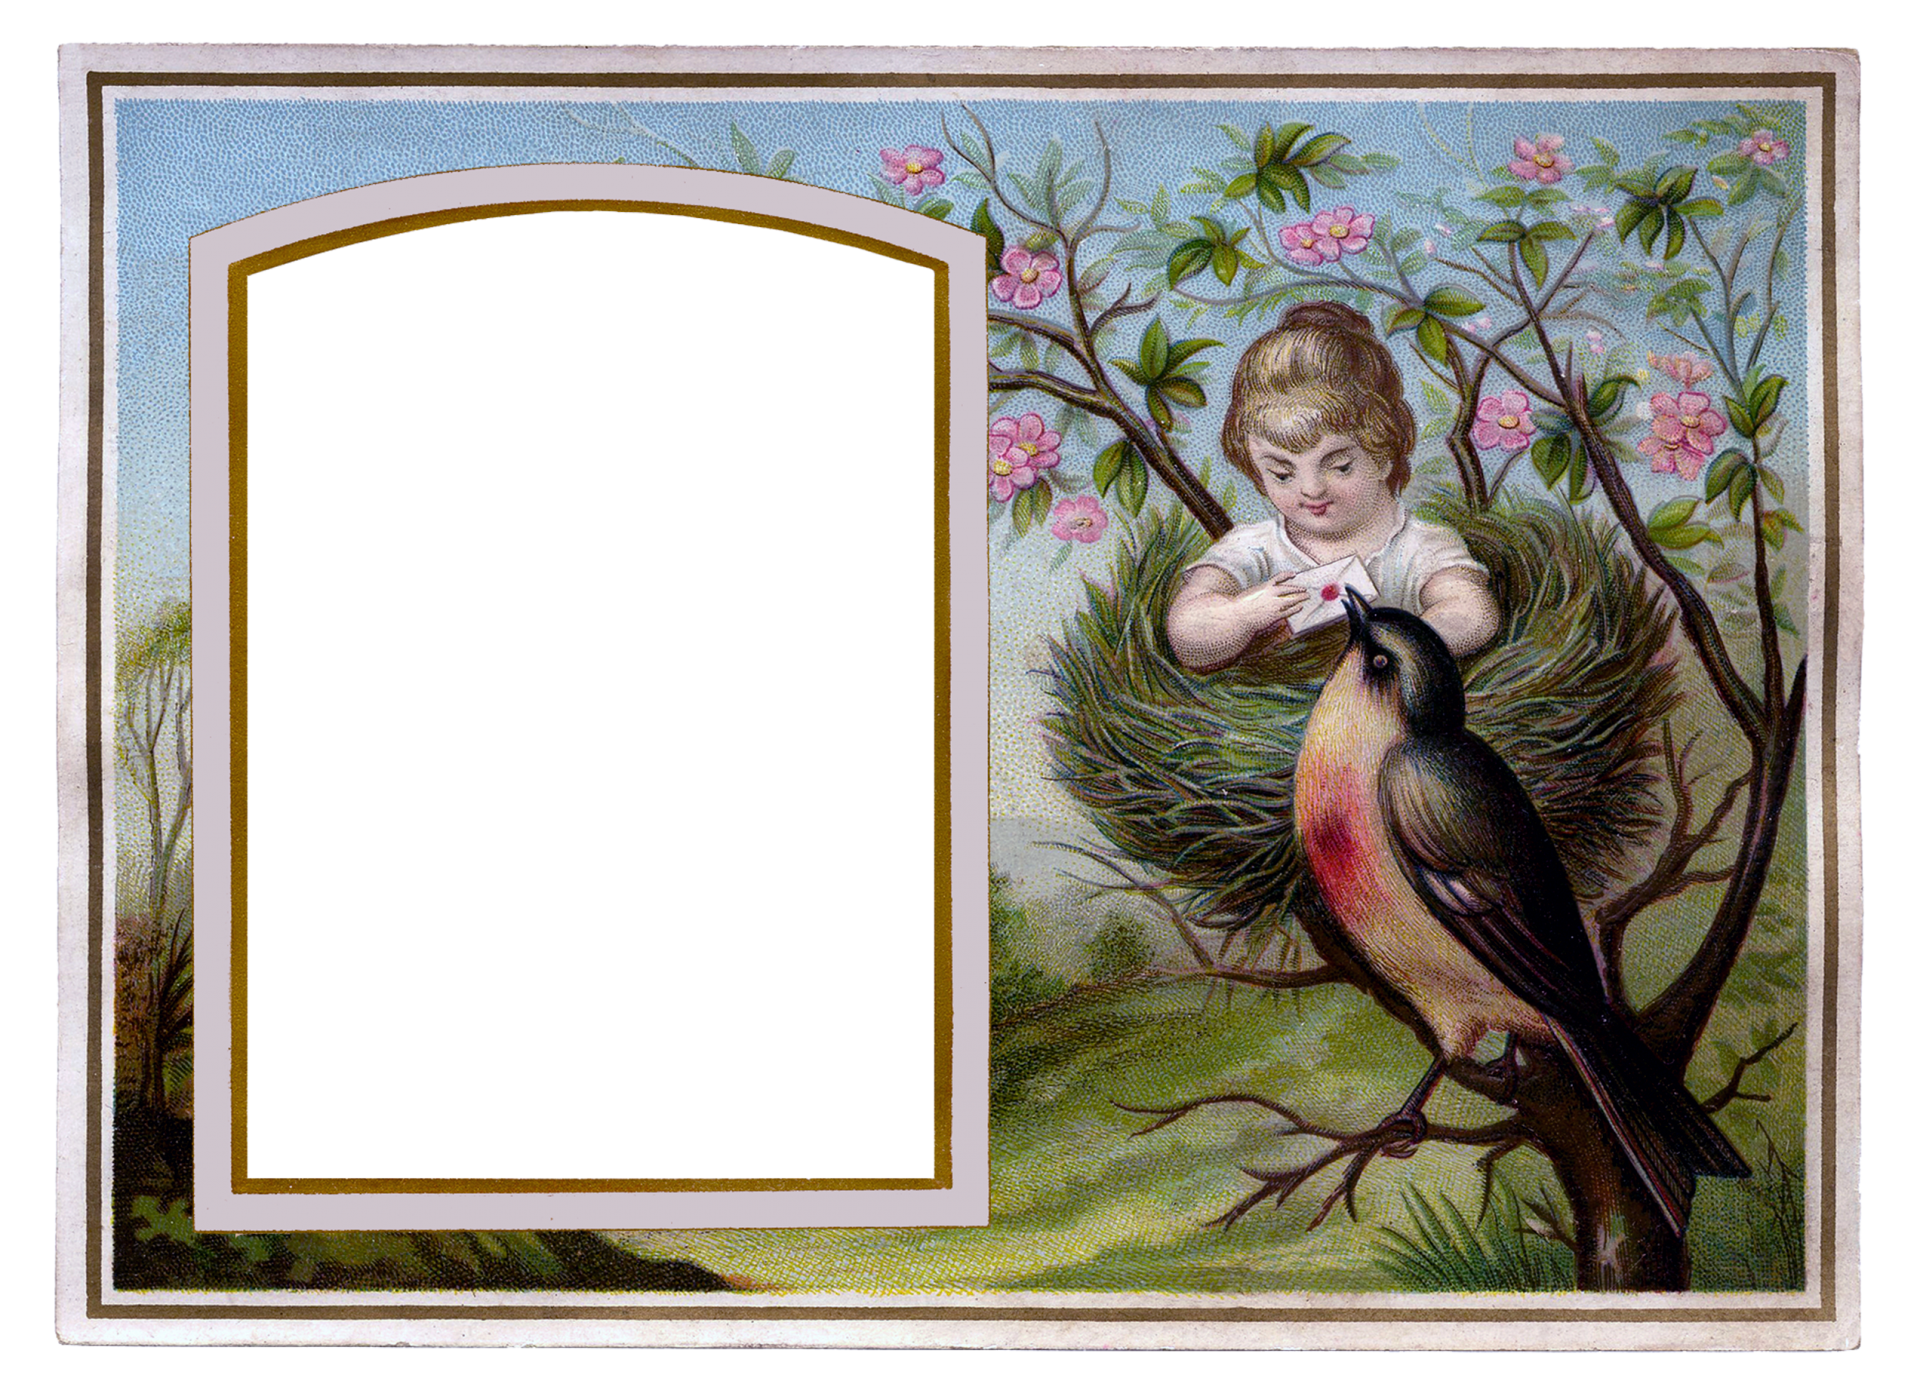 Vintage drawing of a woman sitting in a birds nest with letter delivered by bird floral frame